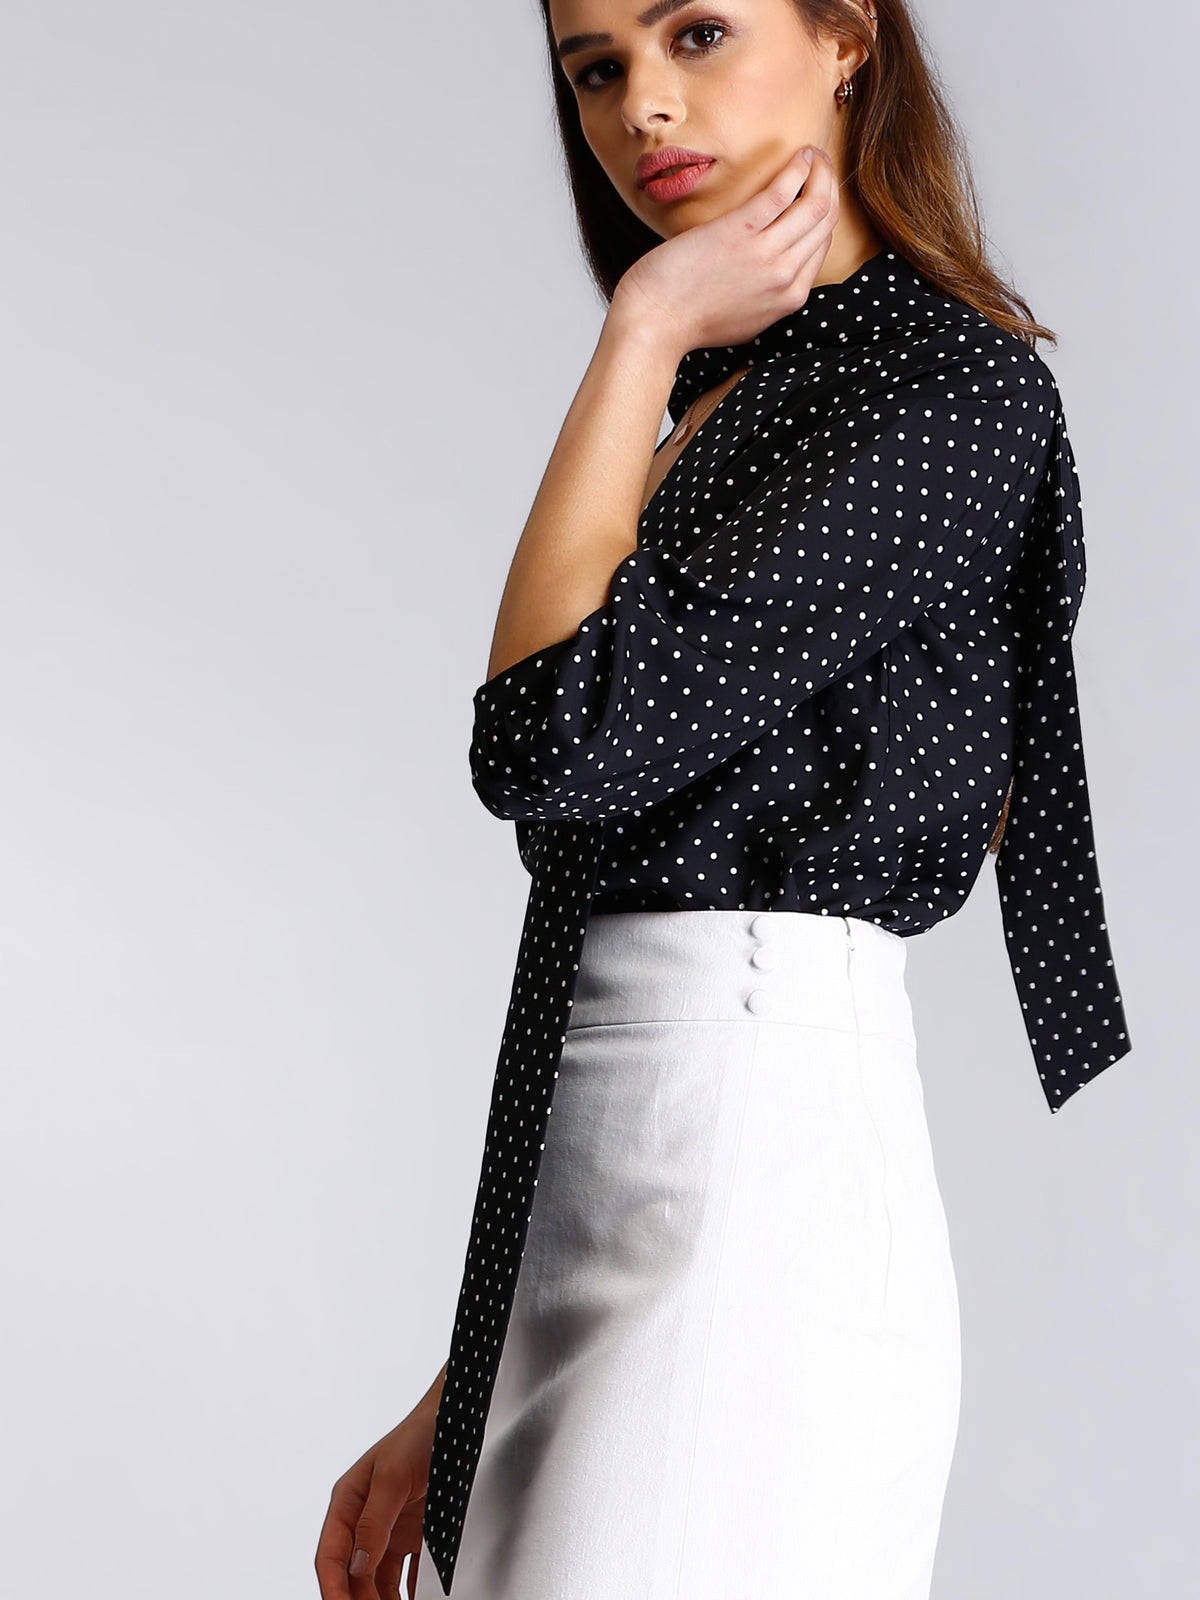 Bow Neck Polka Top - Black and White